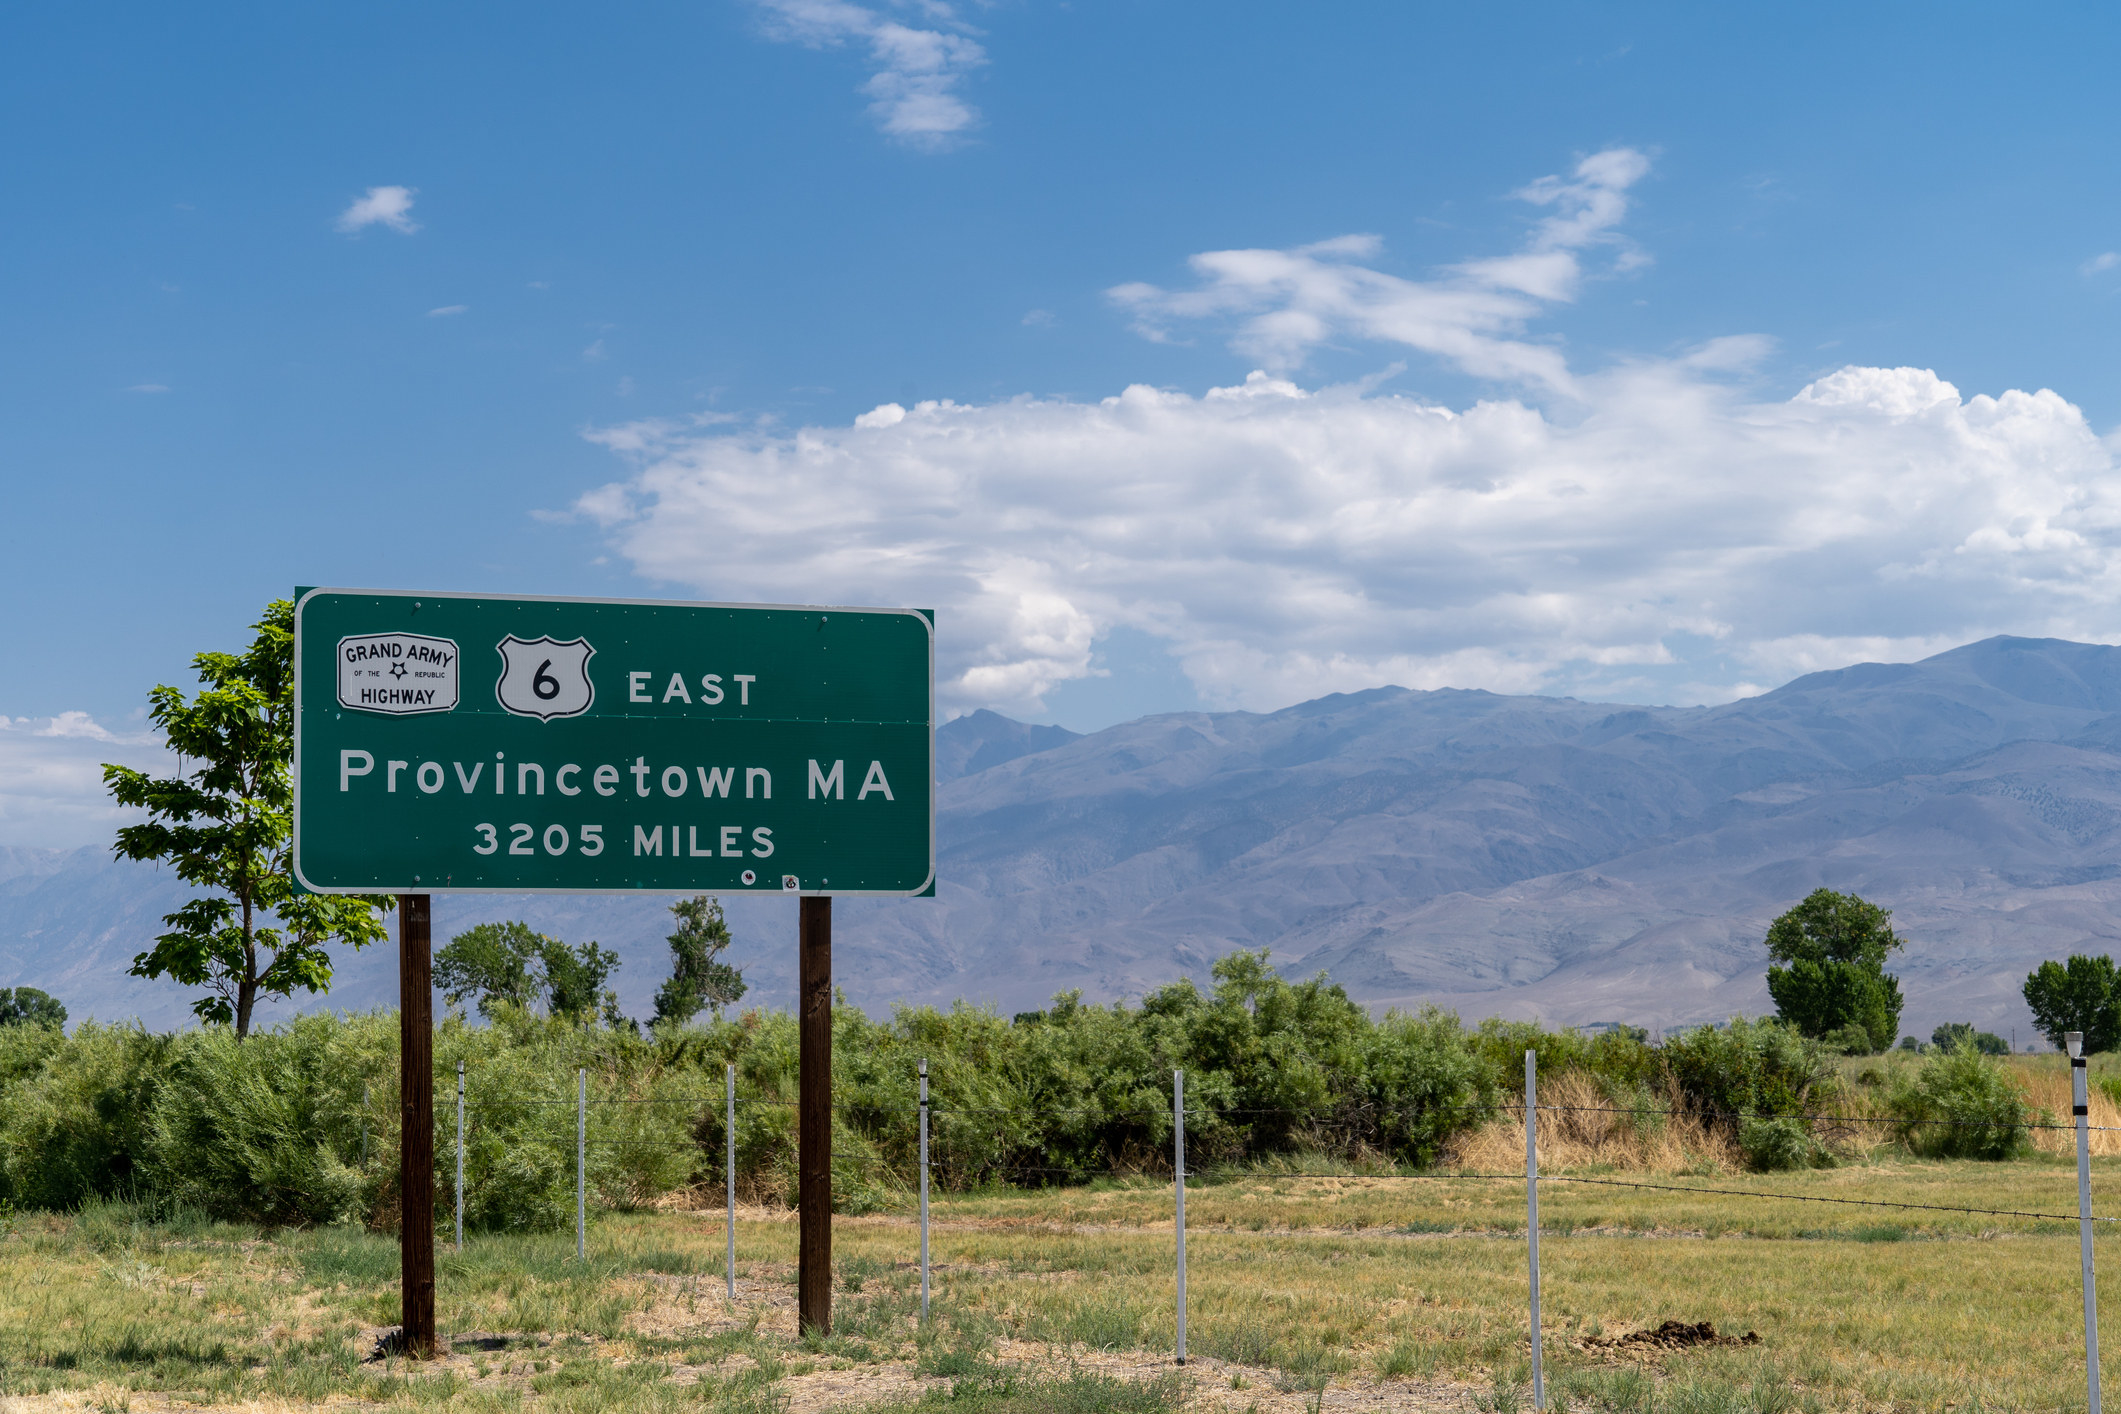 Sign for the Grand Army of the Republic Highway, noting that the end of the highway located in Provincetown Massachusetts is over 3000 miles away from Bishop California